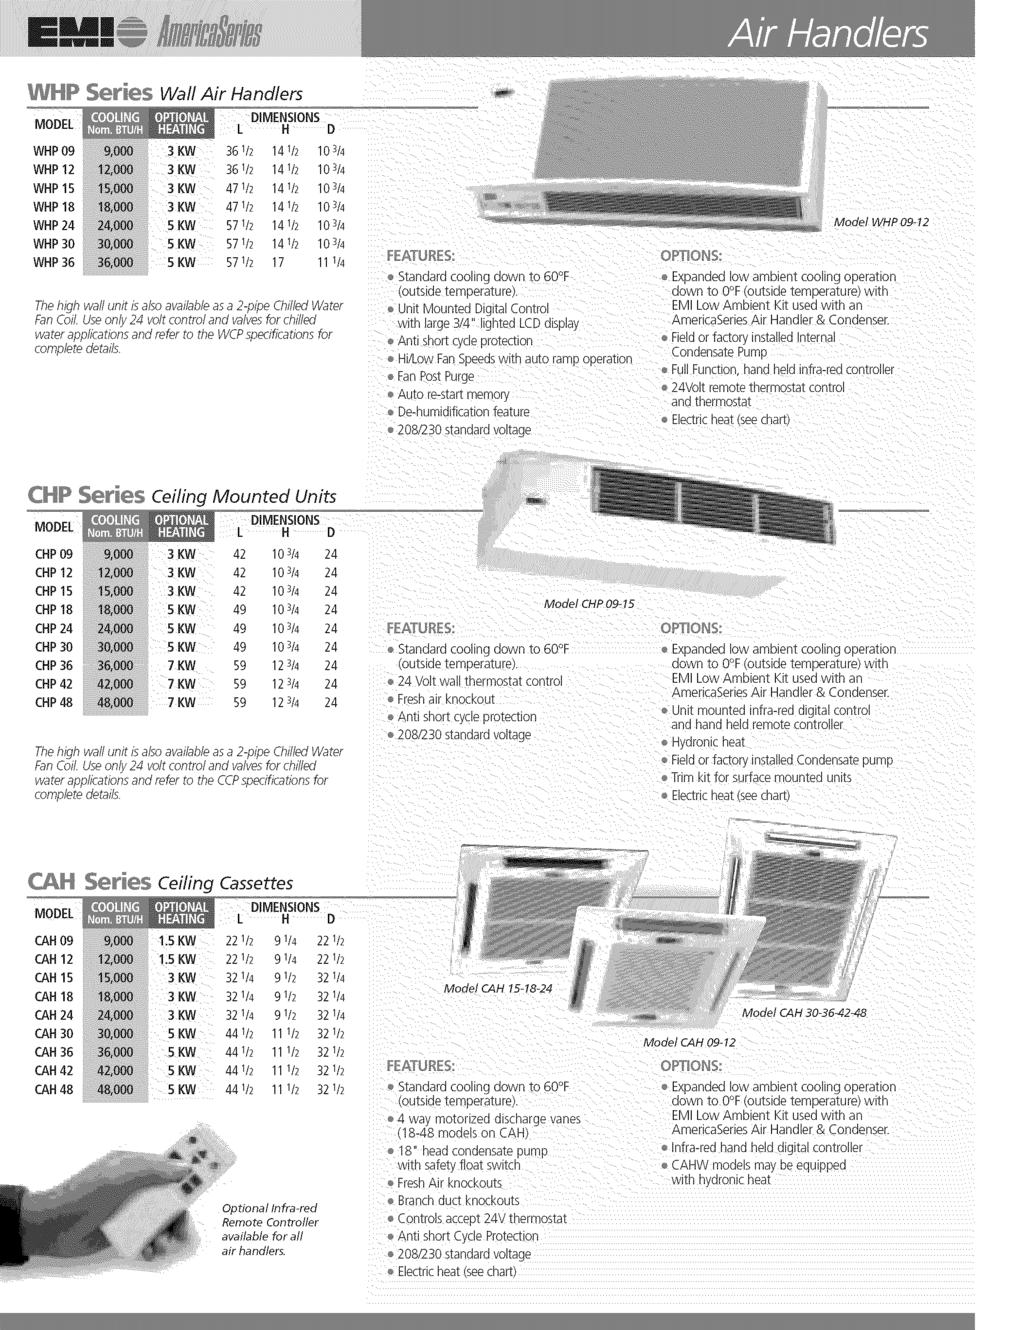 Ductless Split Systems Ib Amo